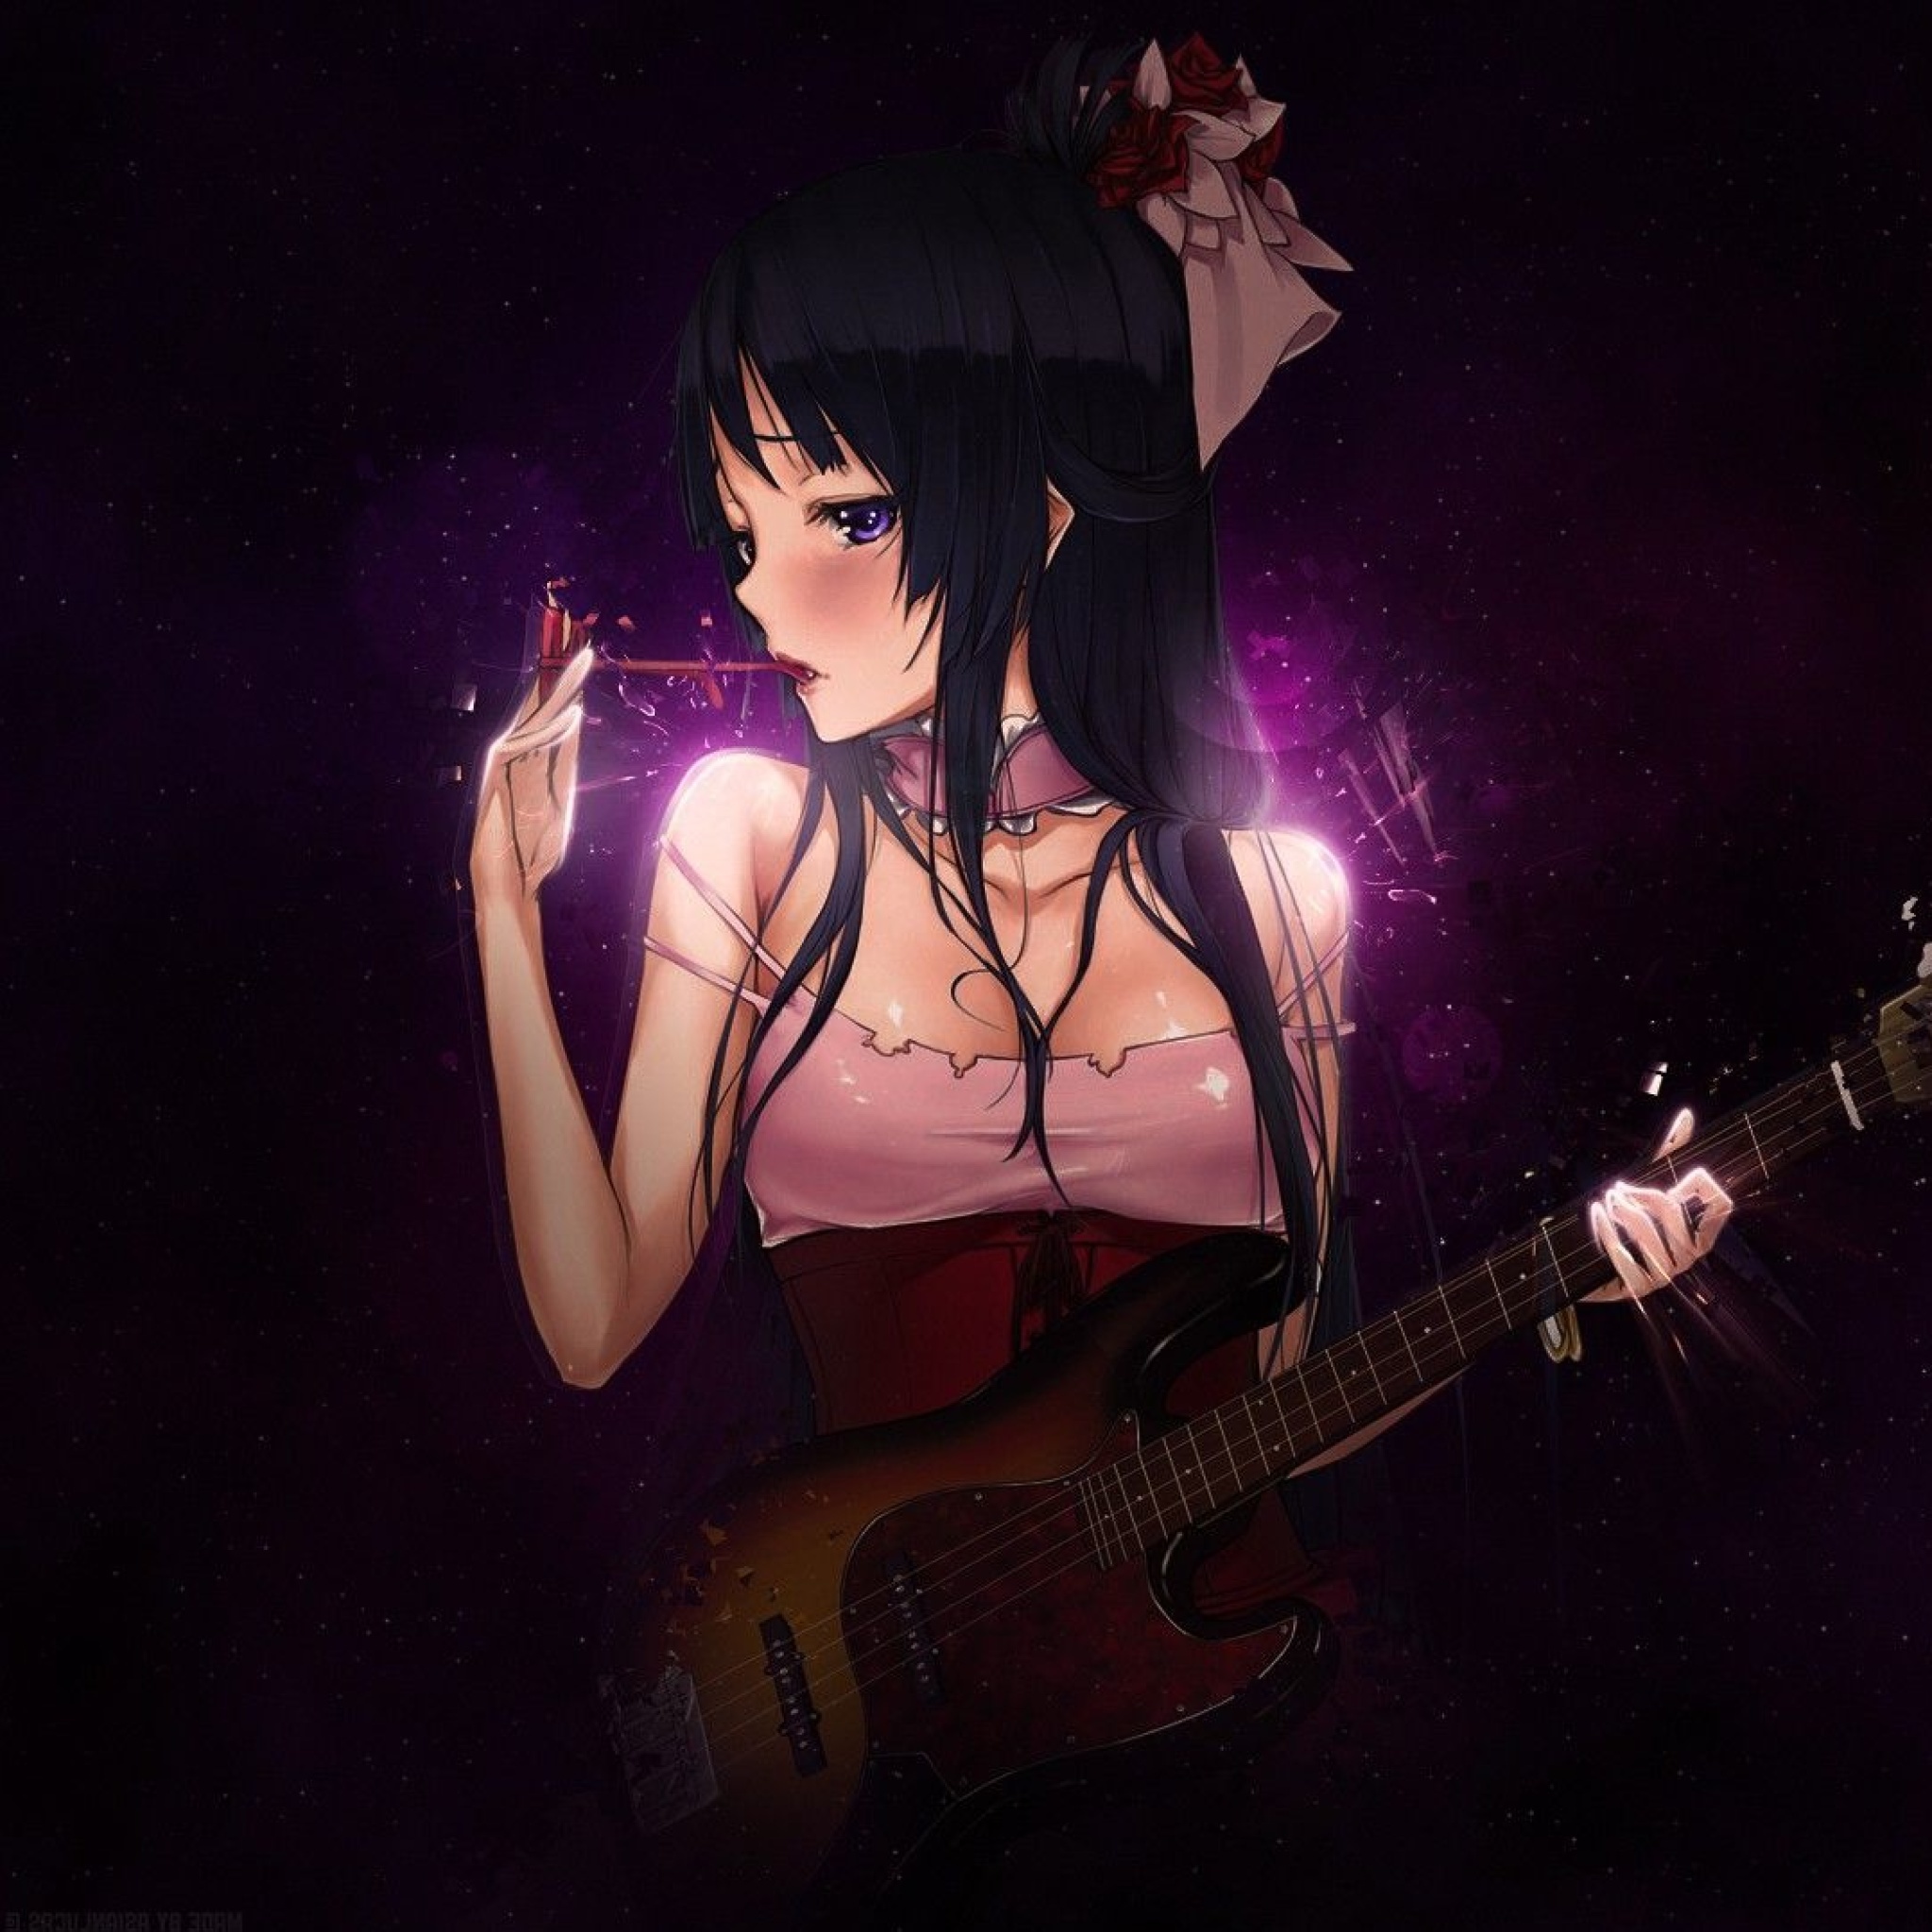 Anime Girl with Guitar wallpaper 2048x2048